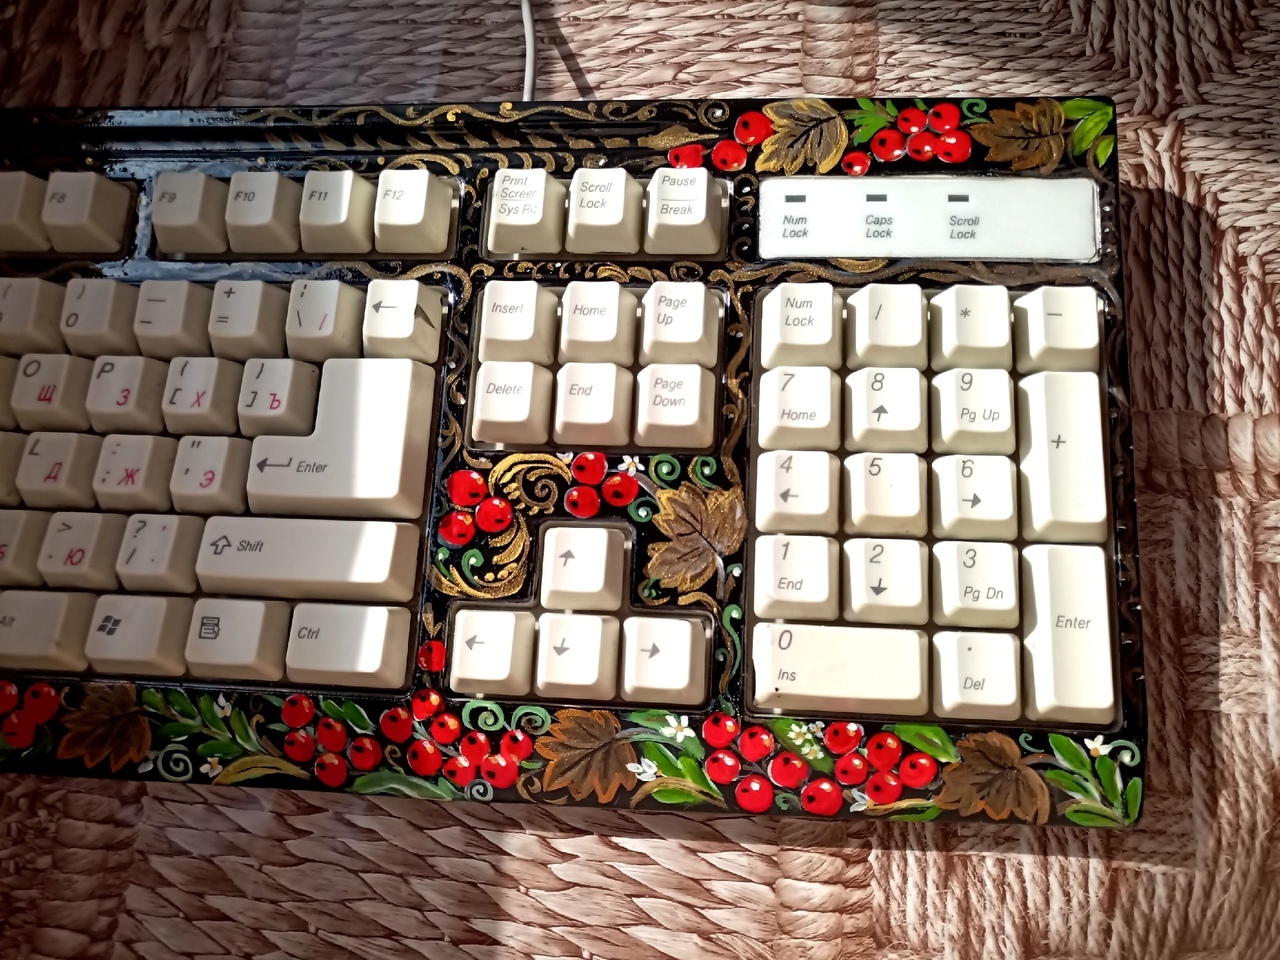 What would the periphery look like if the computer industry came during the heyday of Russian folk art? - My, Khokhloma, Zhostovo, A4tech, Folk art, Periphery, Keyboard, Mouse, Computer, Russian folk art, Painting, crazy hands, Longpost